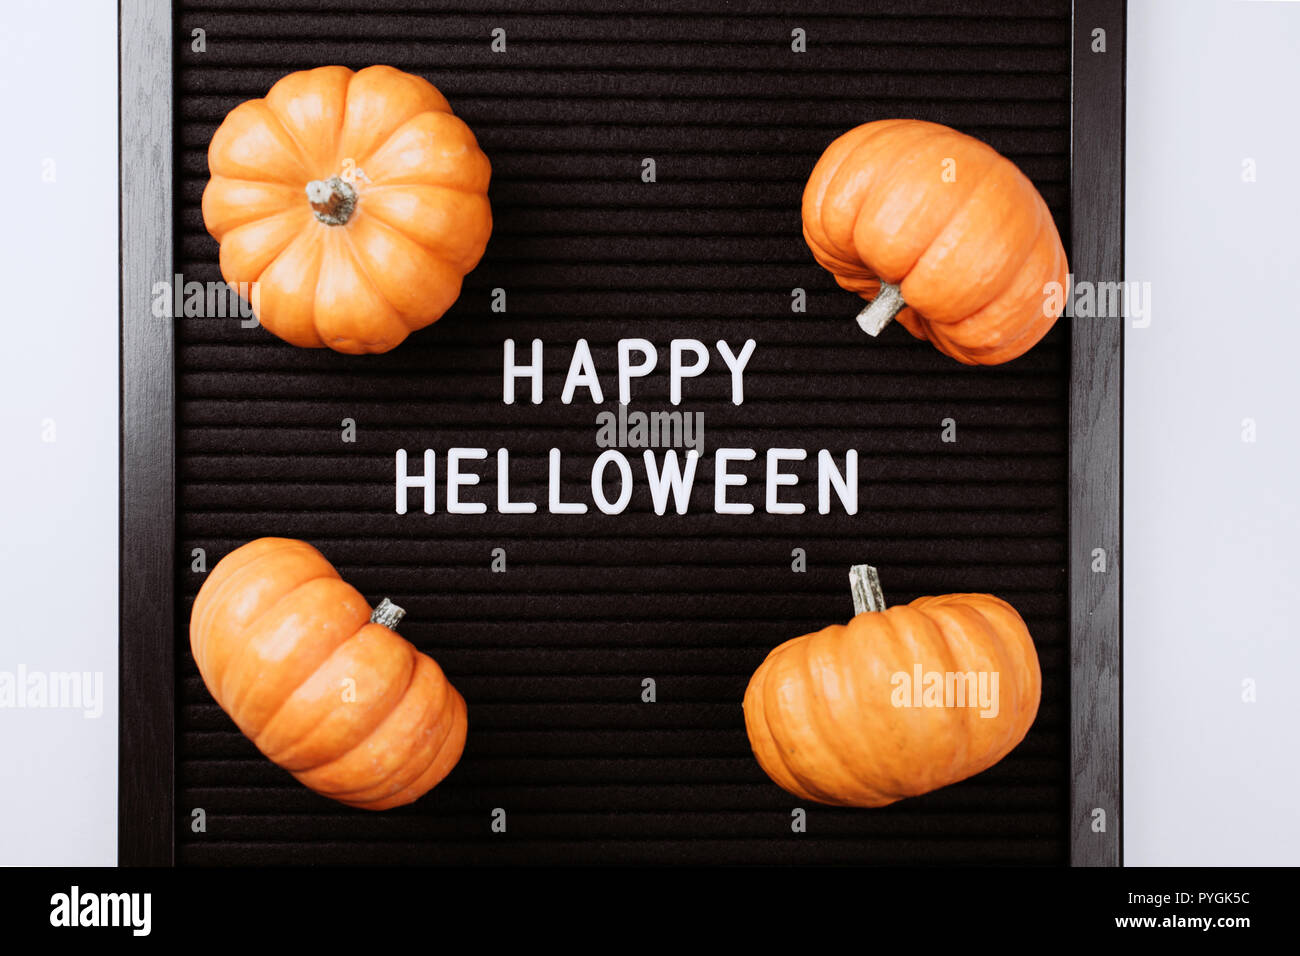 Happy Halloween words on black letter textured board. It is in frame with small yellow pumpkins. Flat lay style. Stock Photo